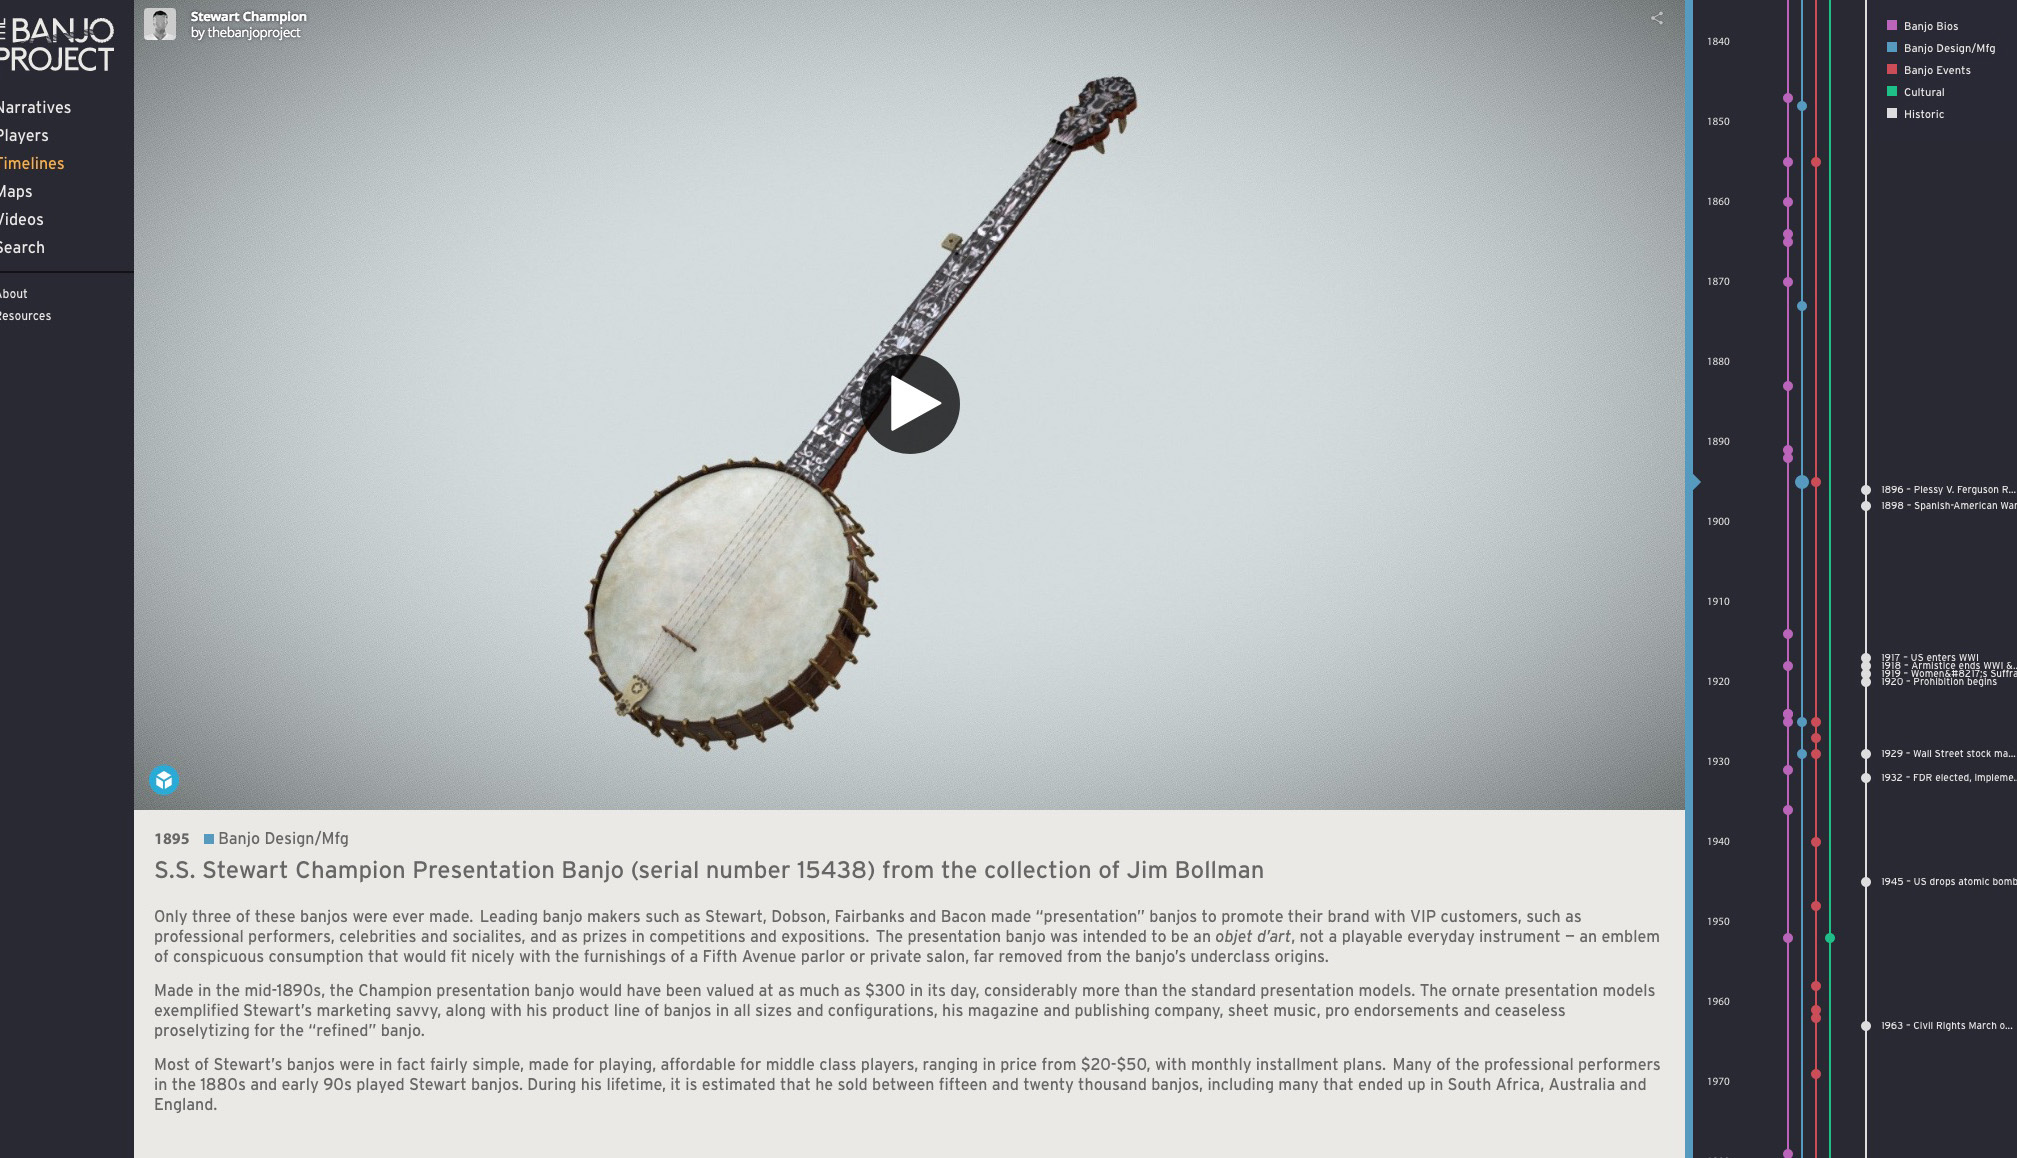 A screenshot from The Banjo Project